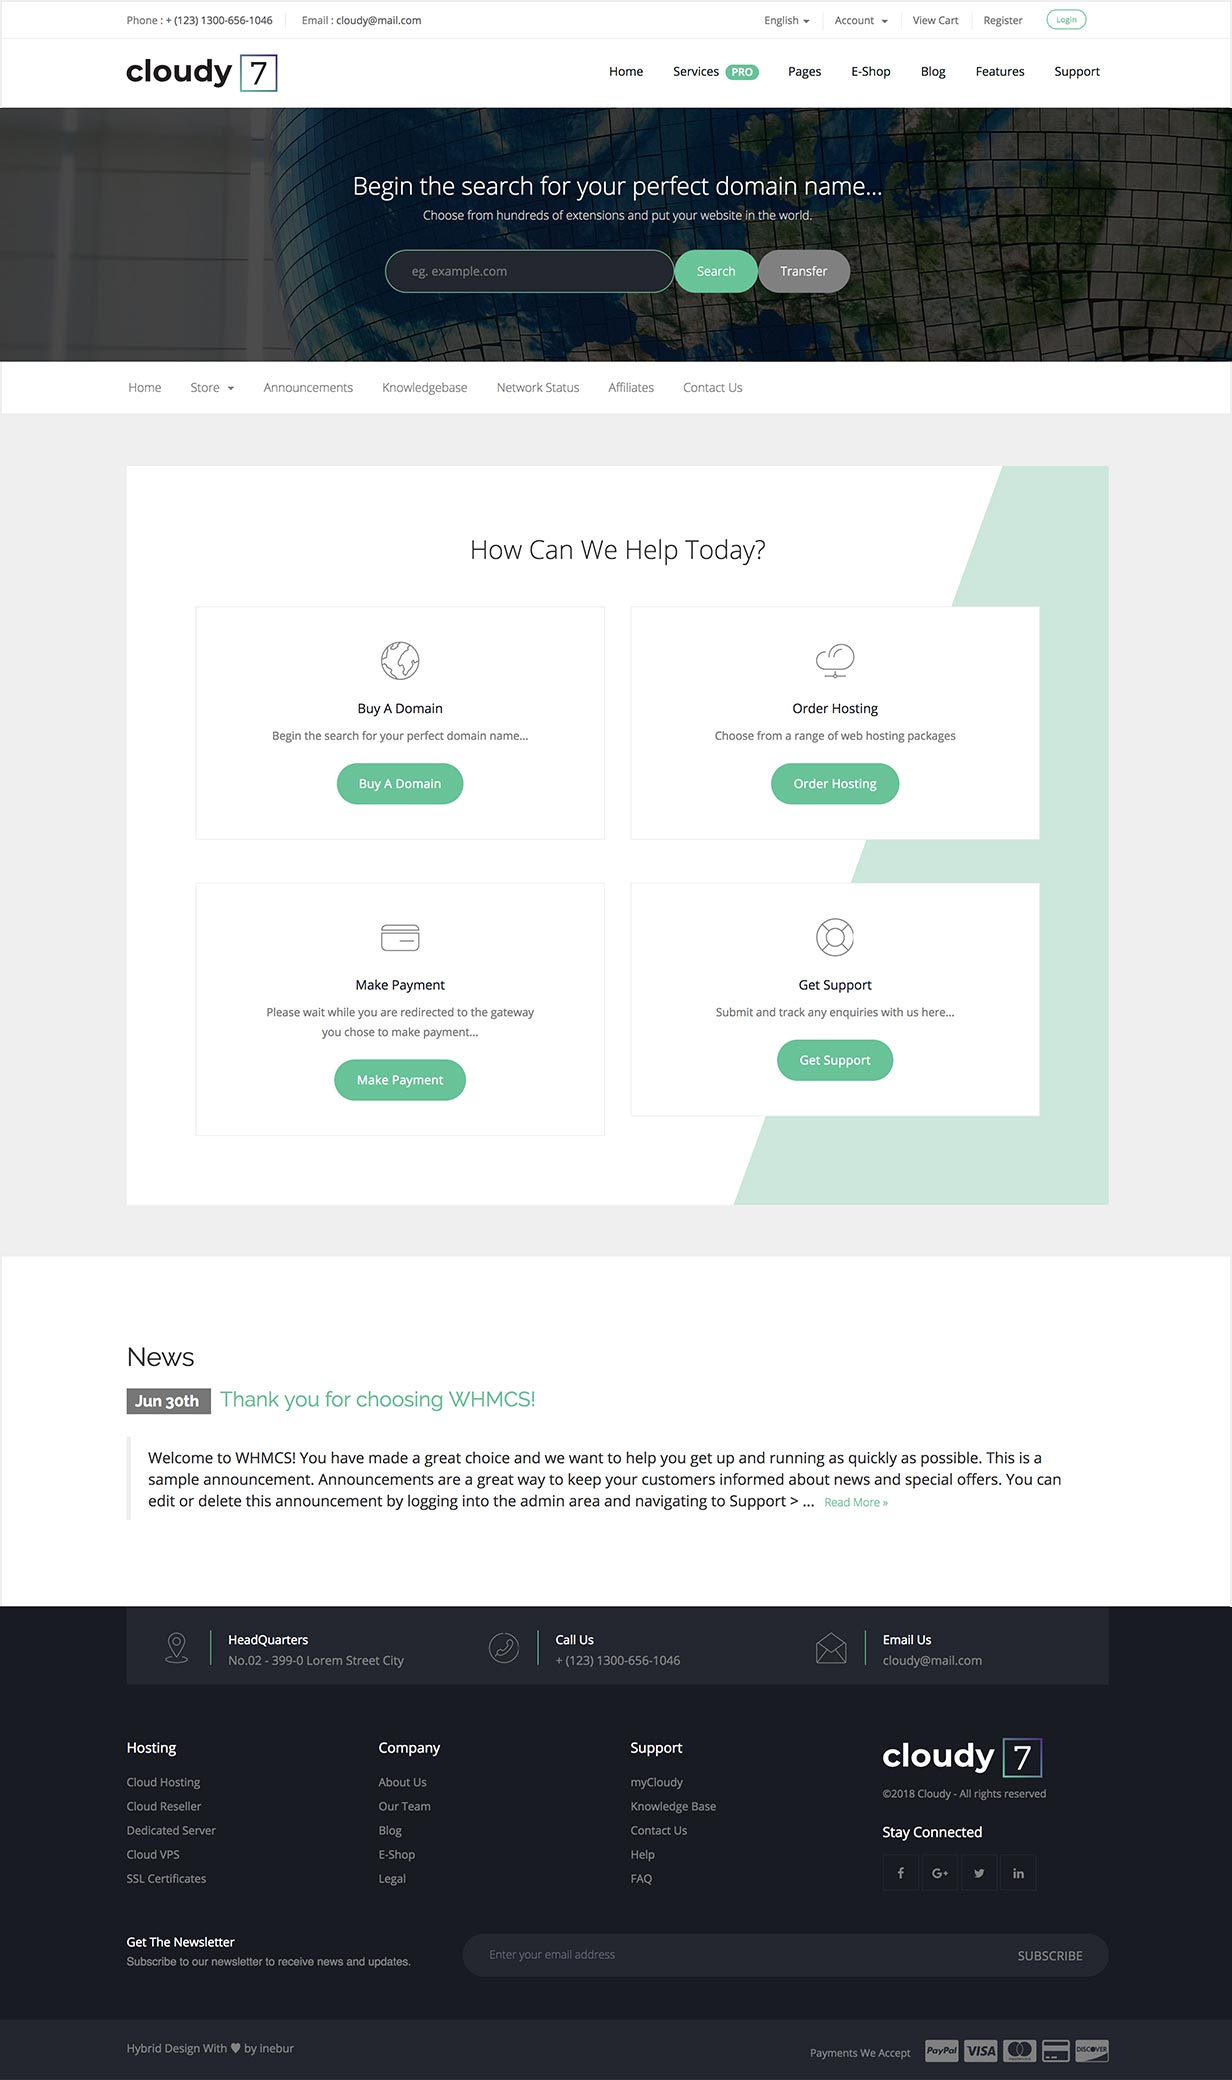 whmcs template - Cloudy 7 - Hosting Service & WHMCS Template